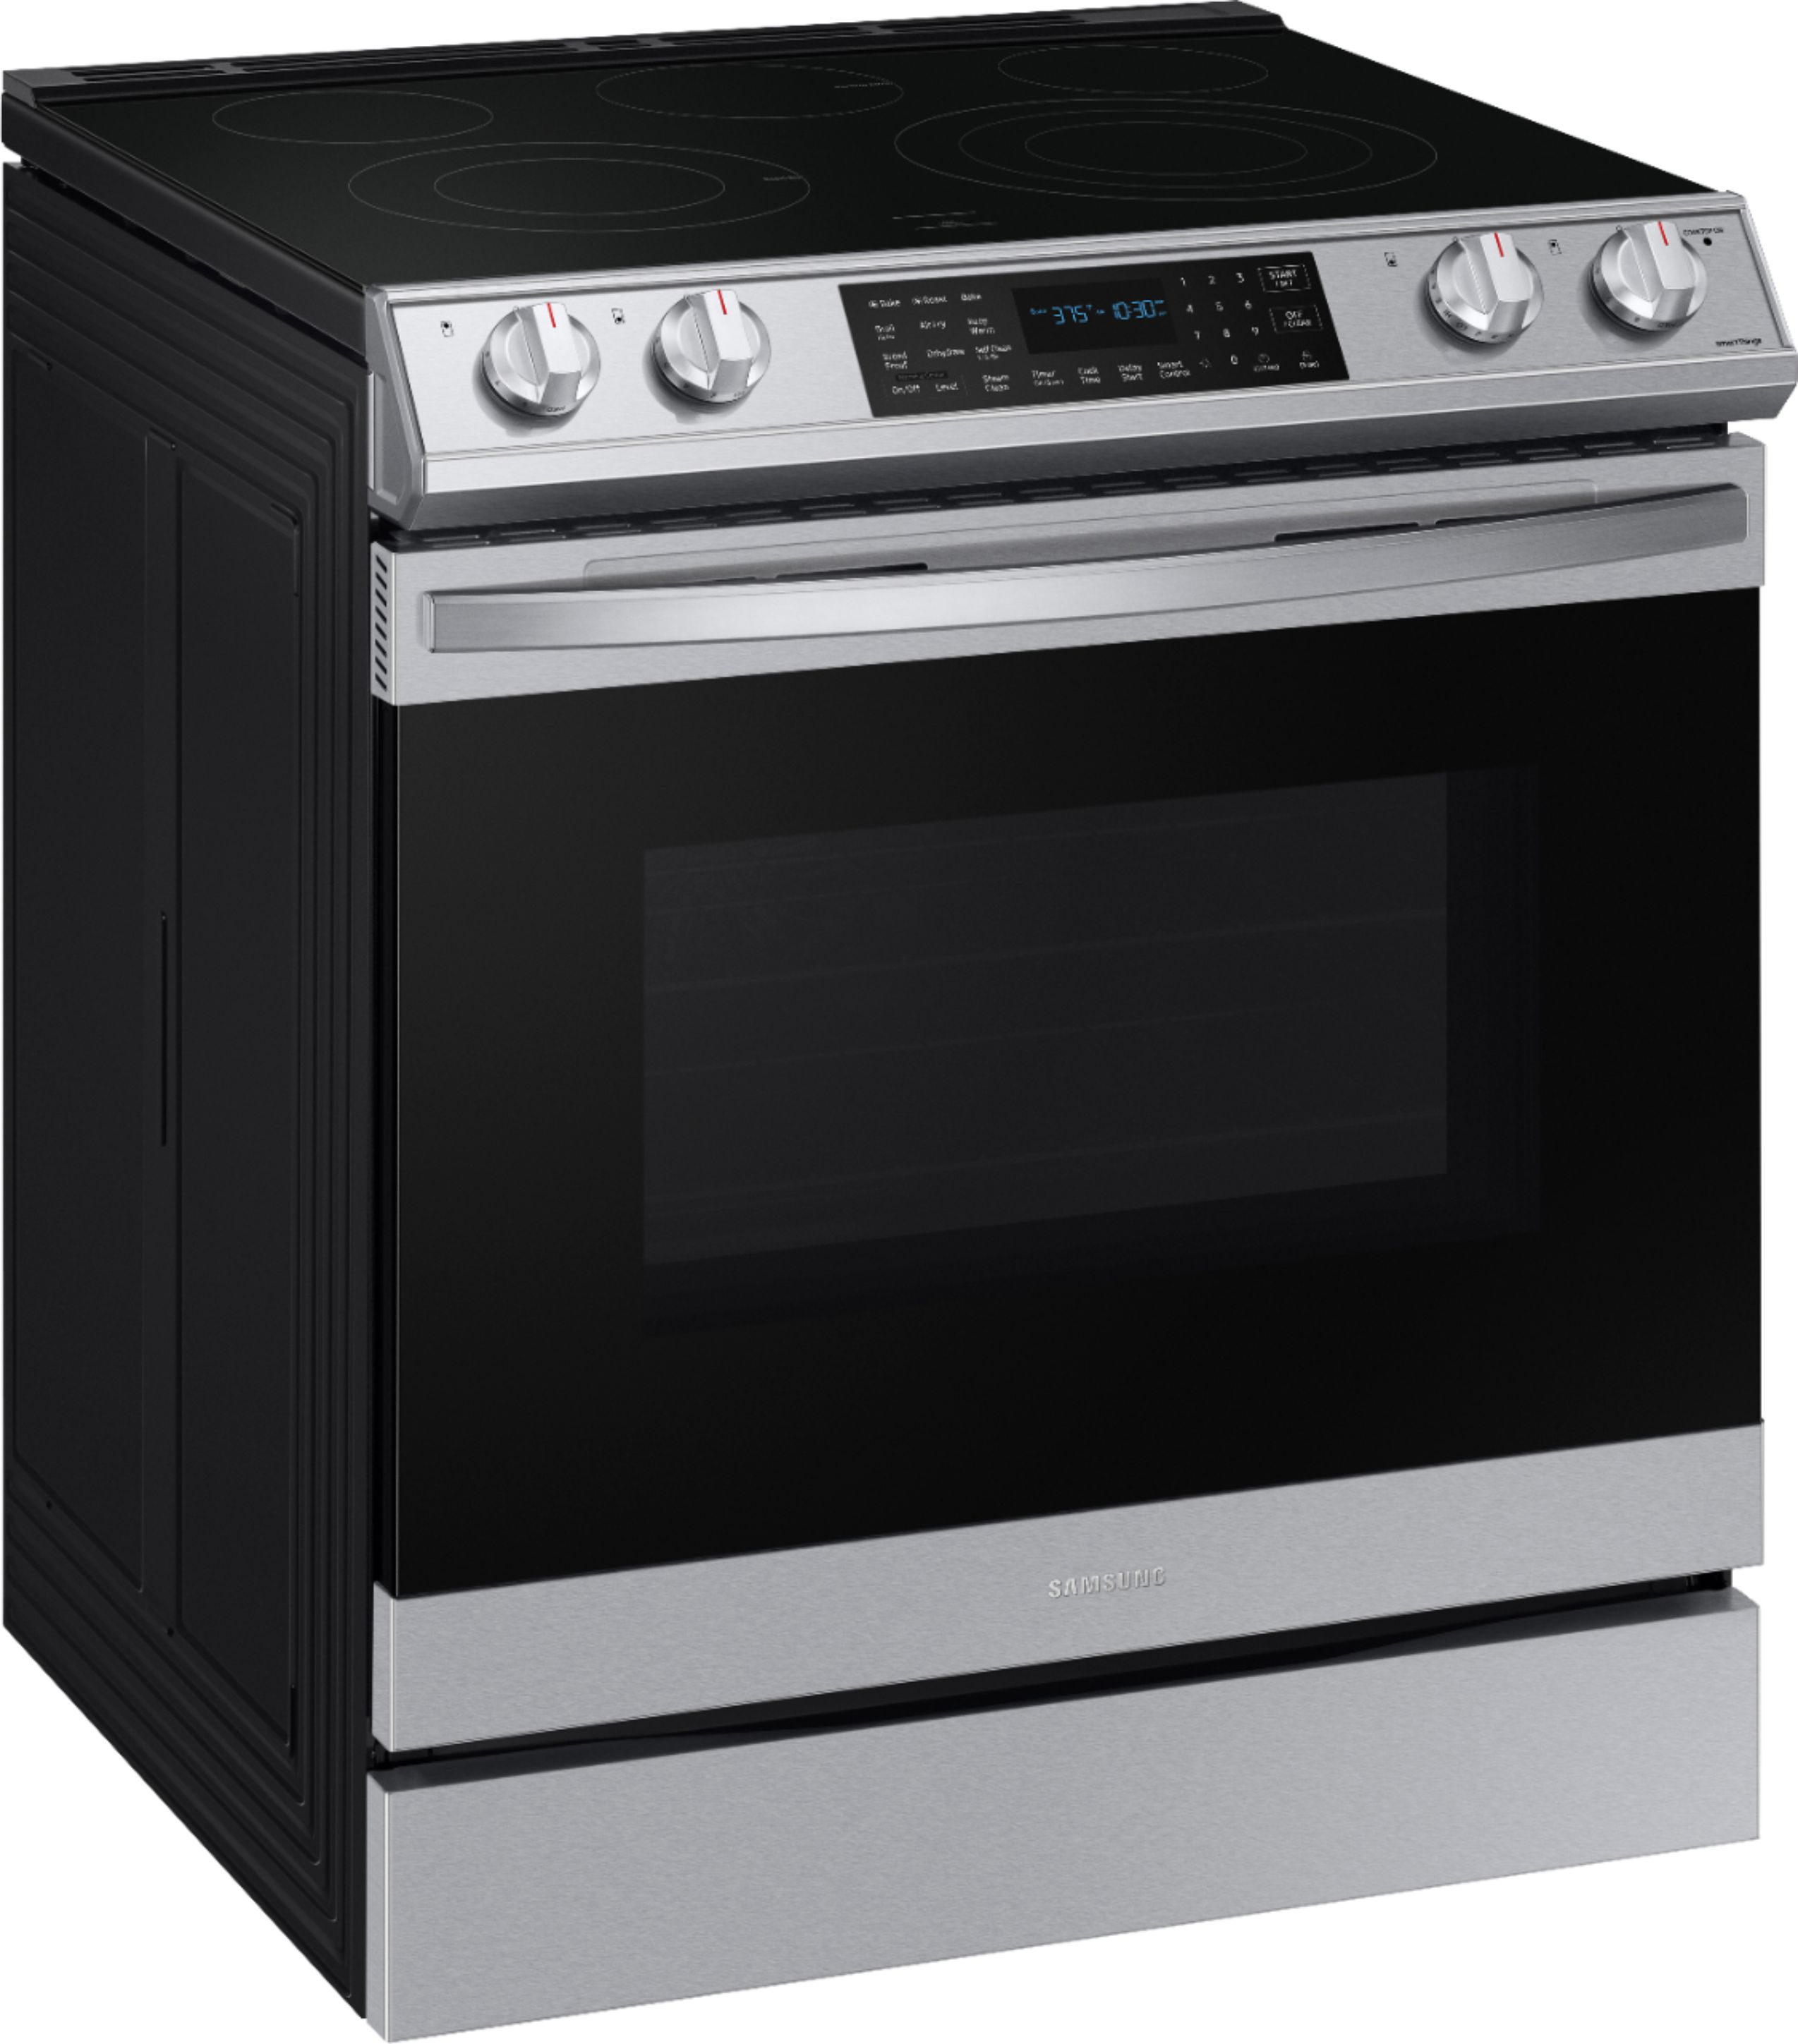 Angle View: KitchenAid - 6.7 Cu. Ft. Self-Cleaning Freestanding Double Oven Electric Convection Range - Black stainless steel